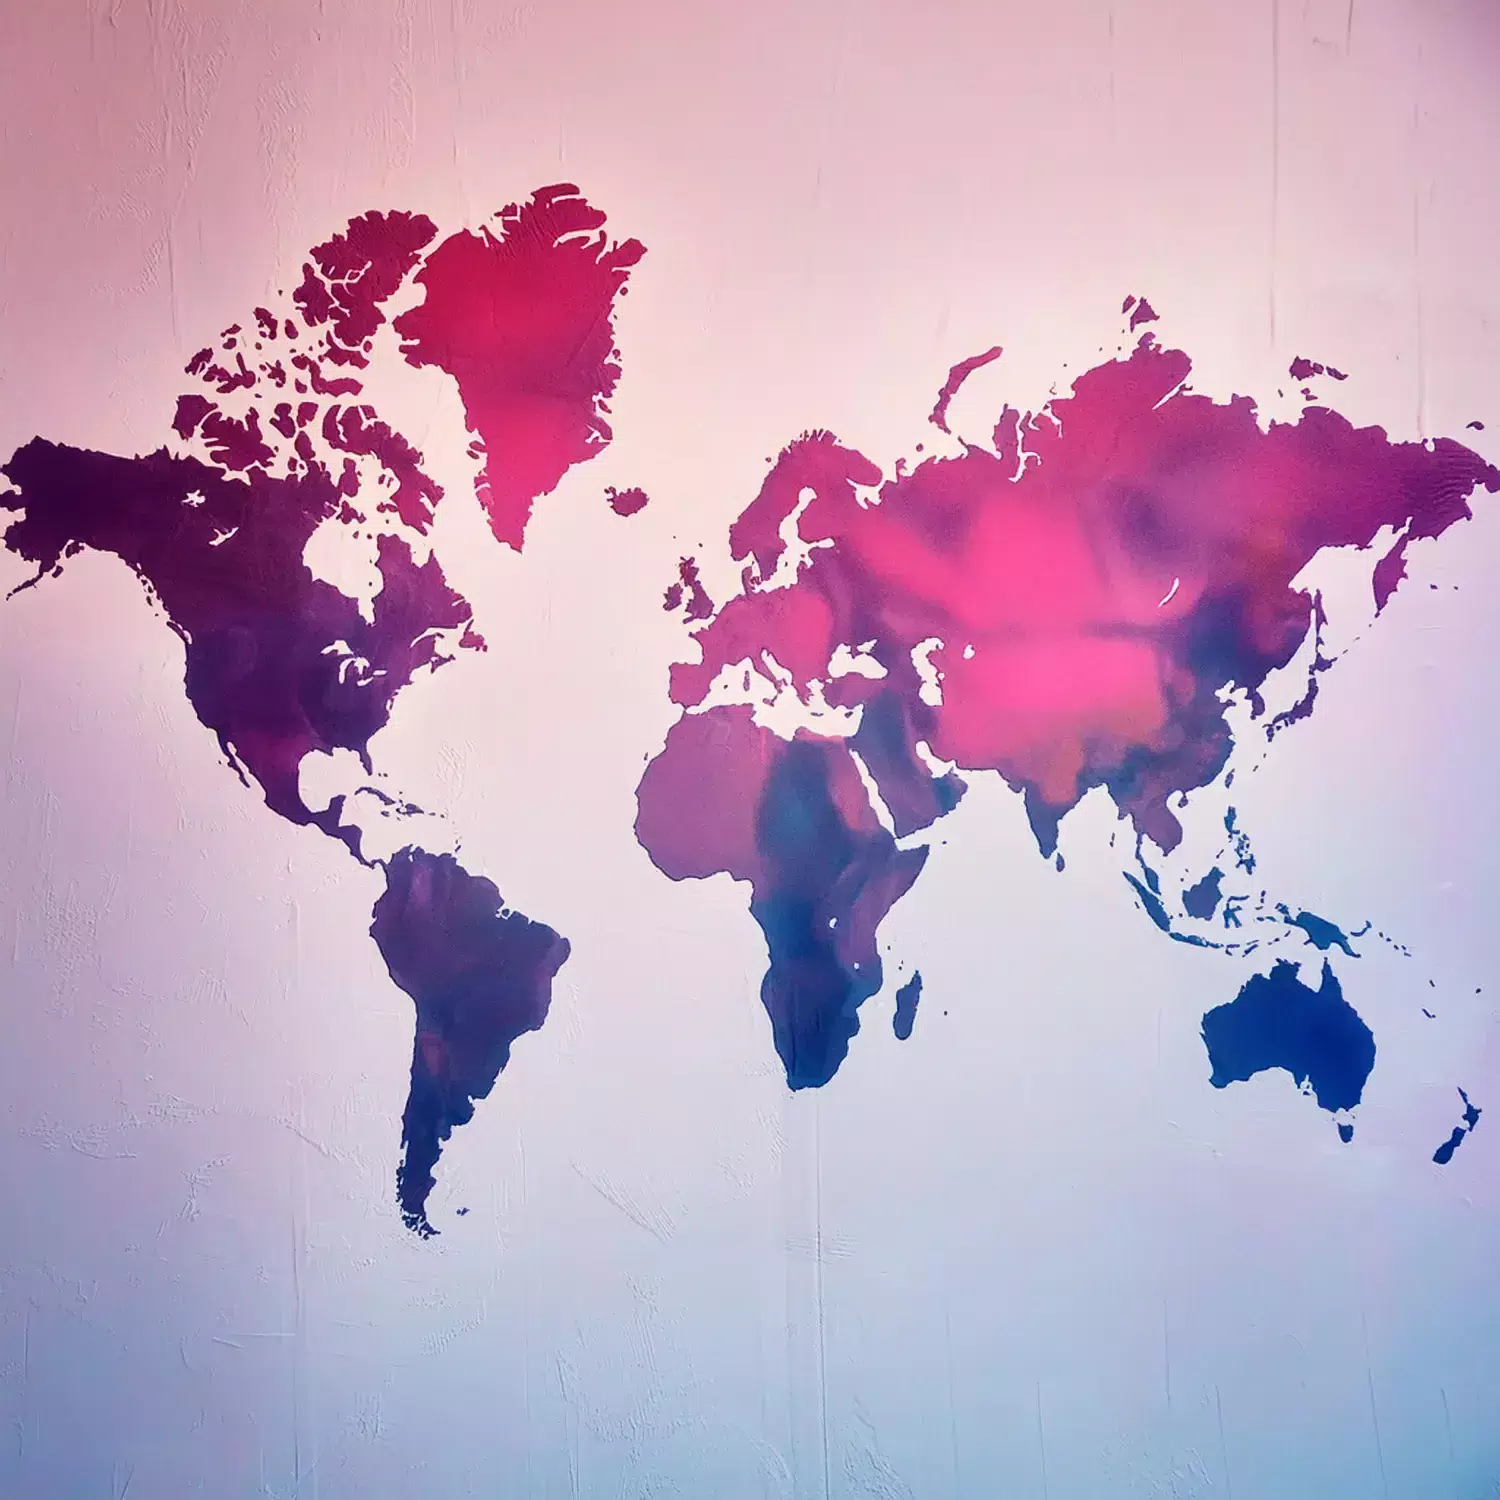 Painting of a world map in pink, blue and purple colors